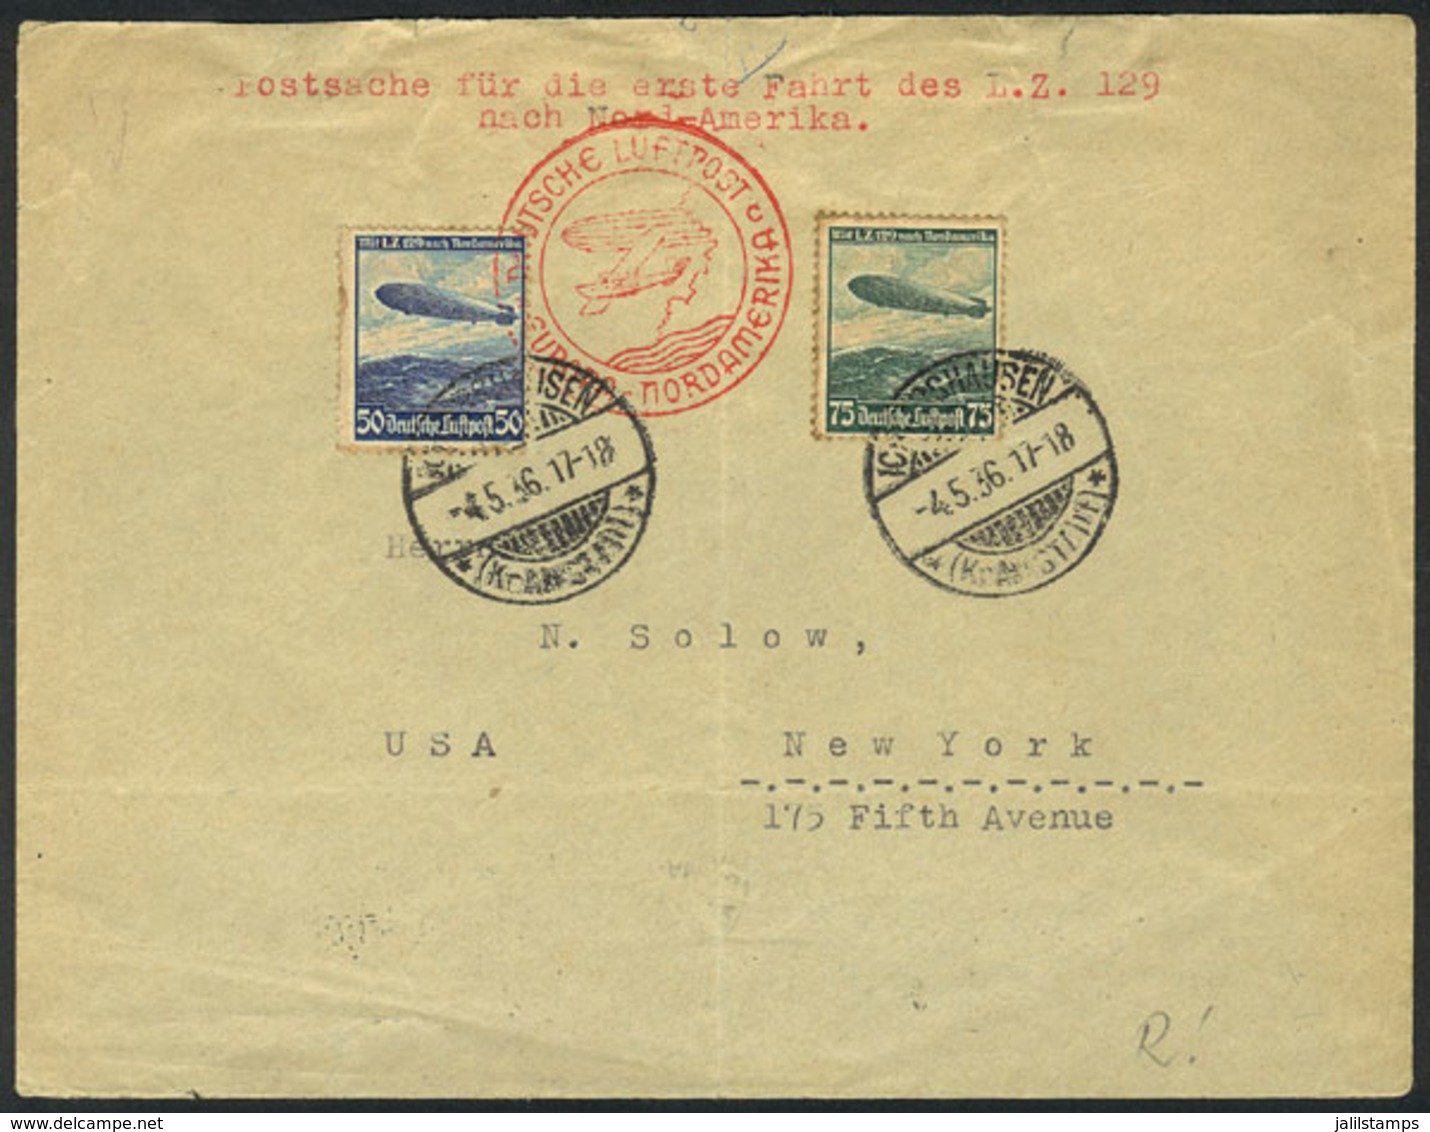 GERMANY: 4/MAY/1936 Ichtershausen - New York, By ZEPPELIN, Cover With Arrival Backstamp, VF Quality! - Covers & Documents